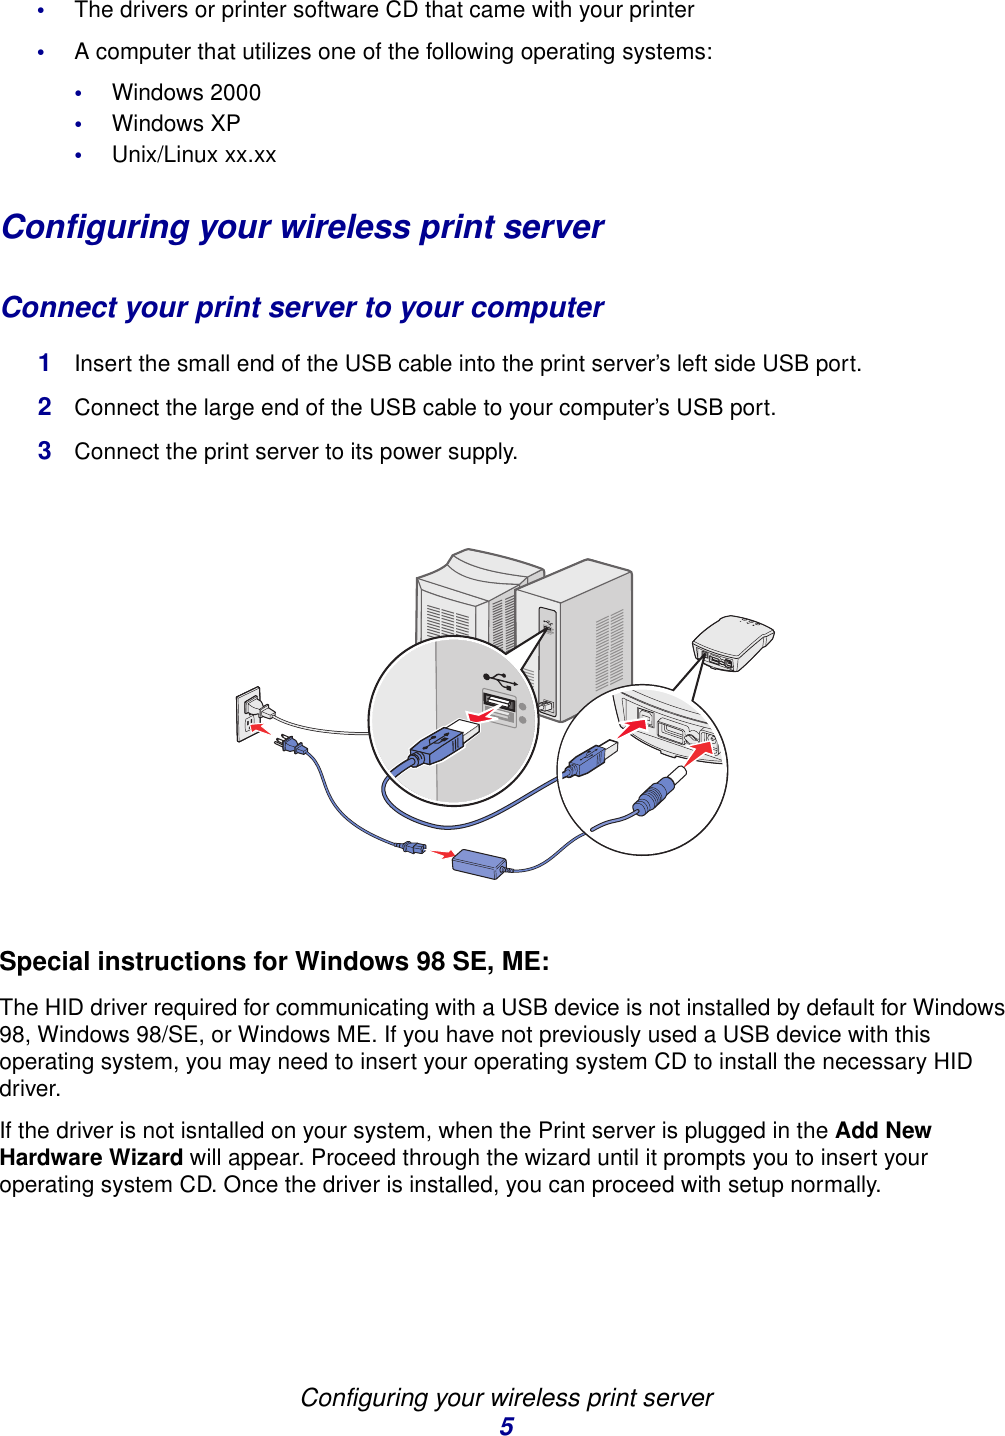 Configuring your wireless print server5•The drivers or printer software CD that came with your printer•A computer that utilizes one of the following operating systems:•Windows 2000•Windows XP•Unix/Linux xx.xxConfiguring your wireless print serverConnect your print server to your computer1Insert the small end of the USB cable into the print server’s left side USB port. 2Connect the large end of the USB cable to your computer’s USB port. 3Connect the print server to its power supply.Special instructions for Windows 98 SE, ME:The HID driver required for communicating with a USB device is not installed by default for Windows 98, Windows 98/SE, or Windows ME. If you have not previously used a USB device with this operating system, you may need to insert your operating system CD to install the necessary HID driver. If the driver is not isntalled on your system, when the Print server is plugged in the Add New Hardware Wizard will appear. Proceed through the wizard until it prompts you to insert your operating system CD. Once the driver is installed, you can proceed with setup normally.